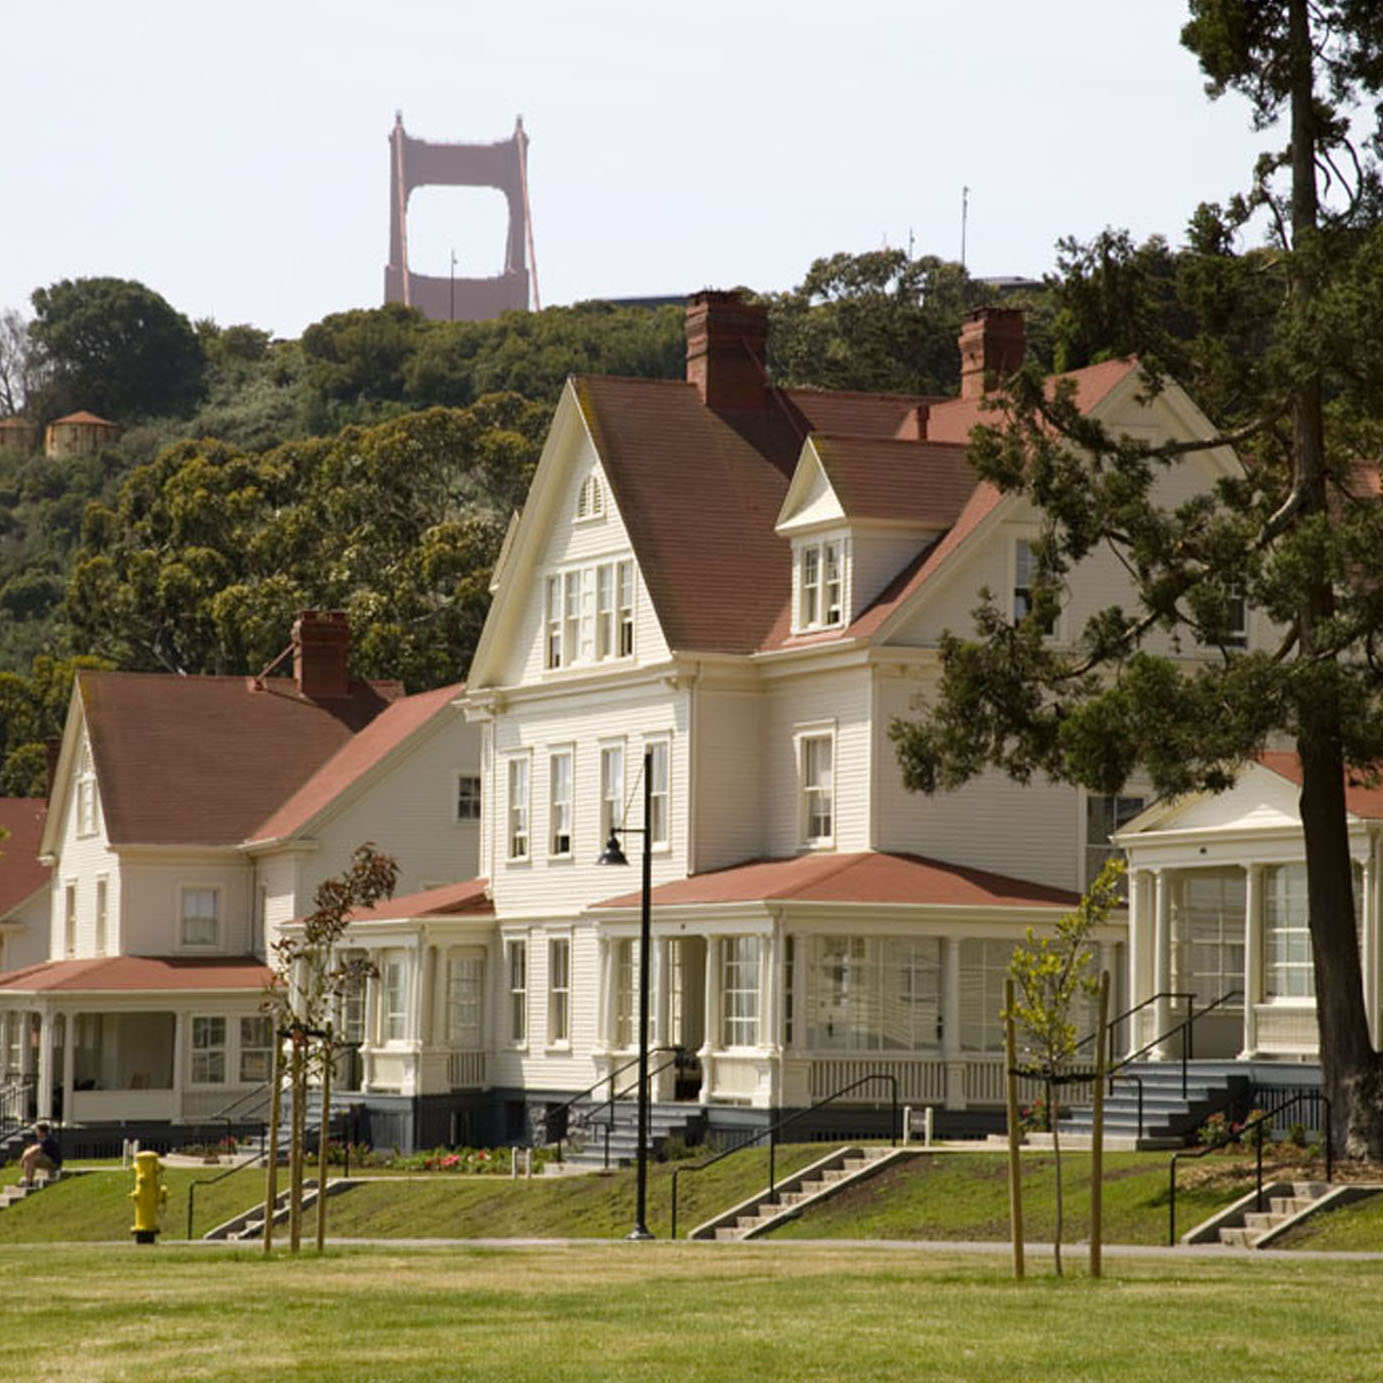 Cavallo Point Microfleece Vest (Corporate) — cavallo point – the lodge at  the golden gate